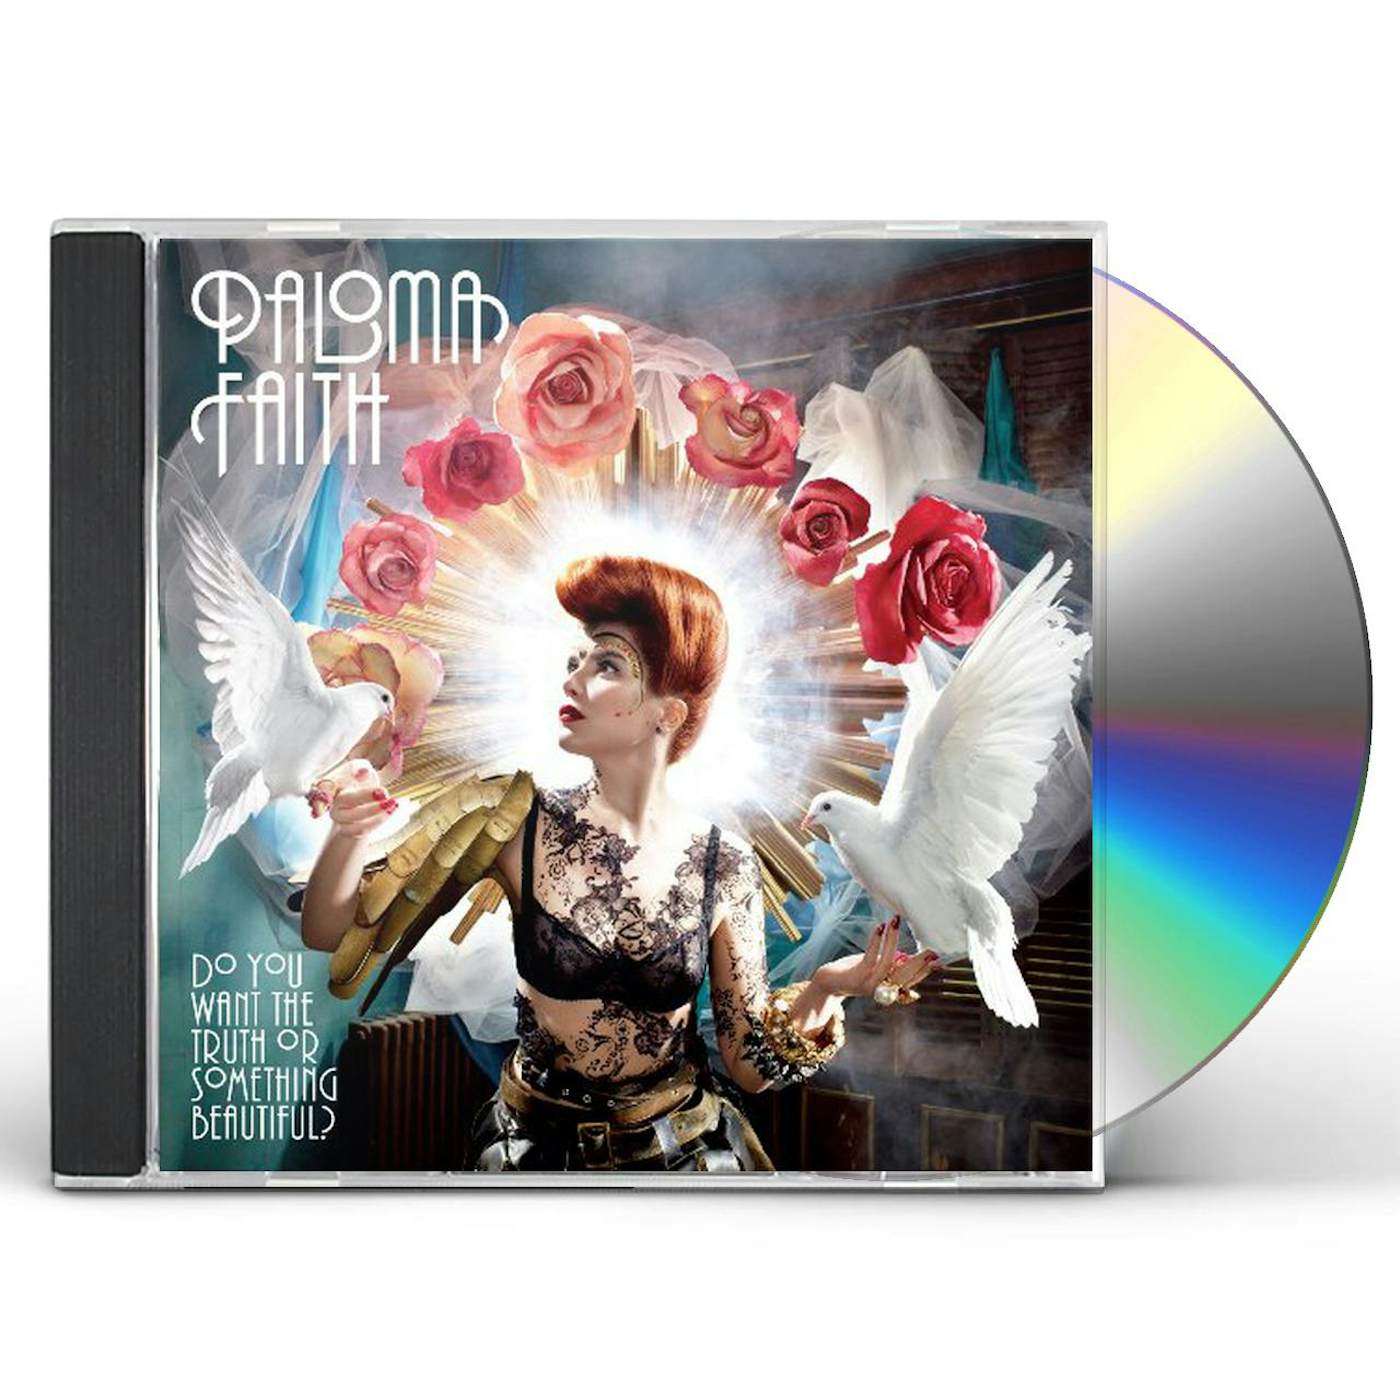 Paloma Faith DO YOU WANT THE TRUTH OR SOMETHING BEAUTIFUL CD